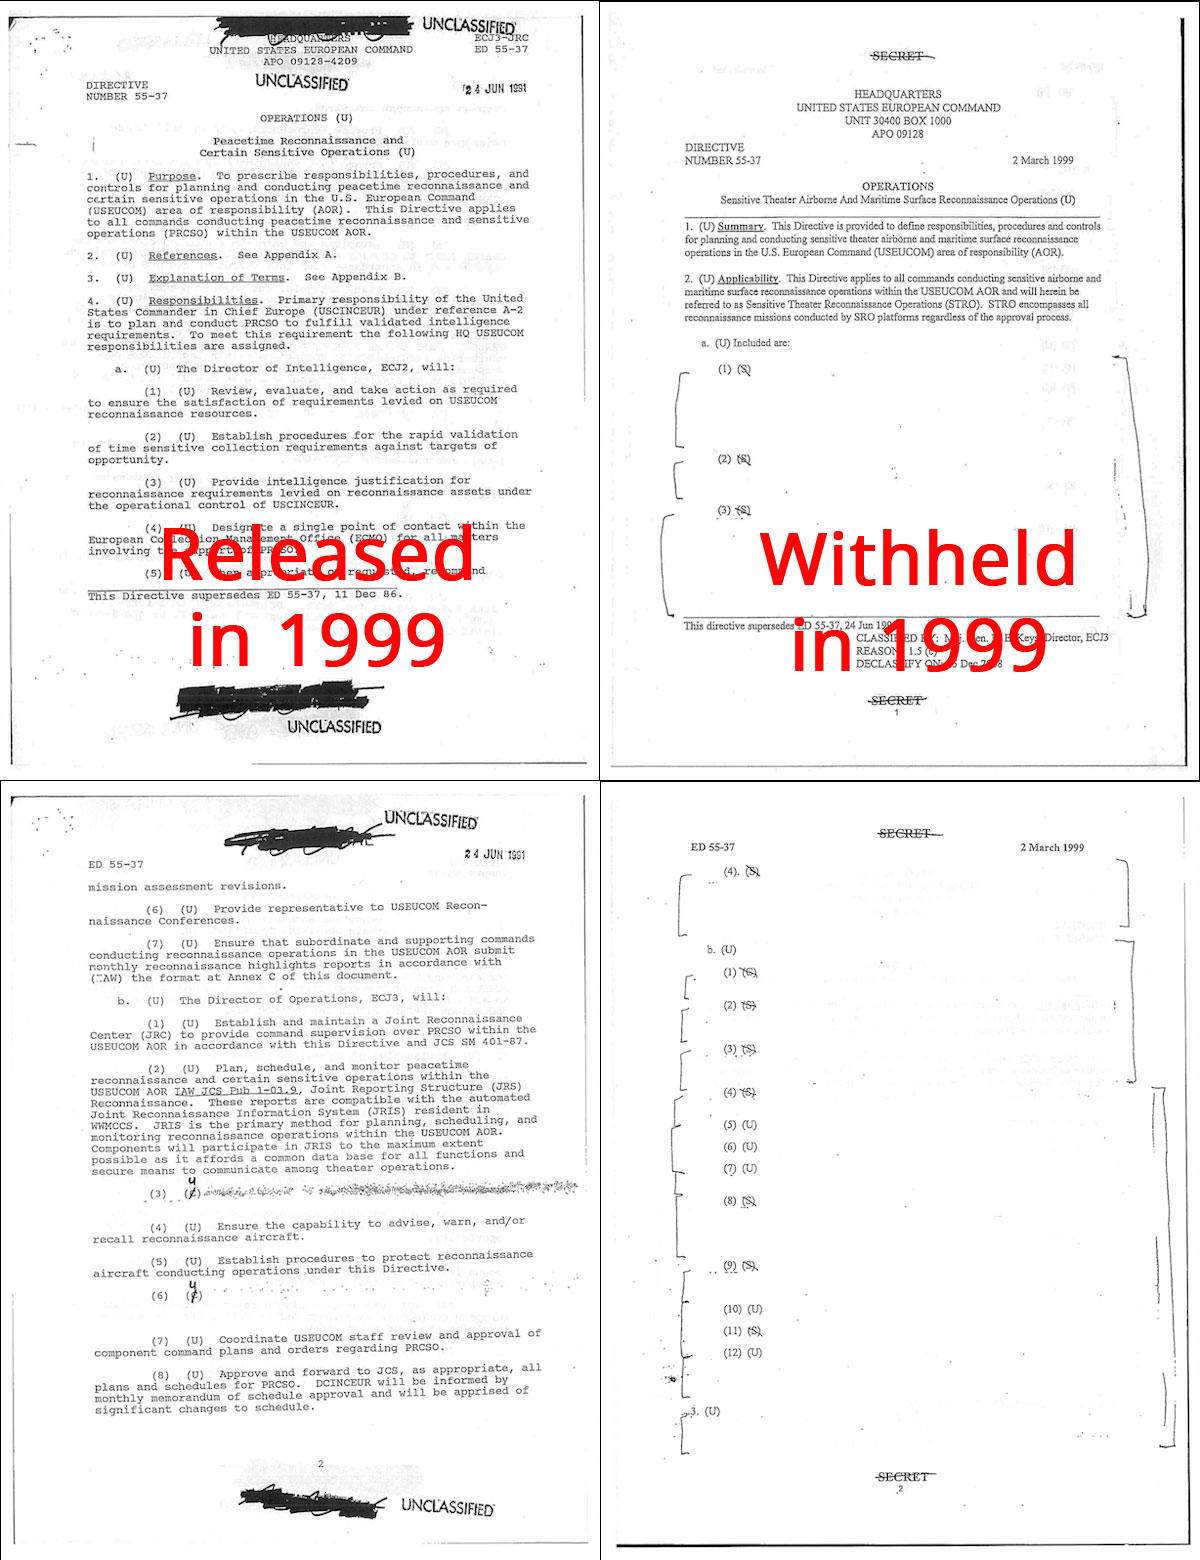 Side-by-side images of different declassifications of the same information